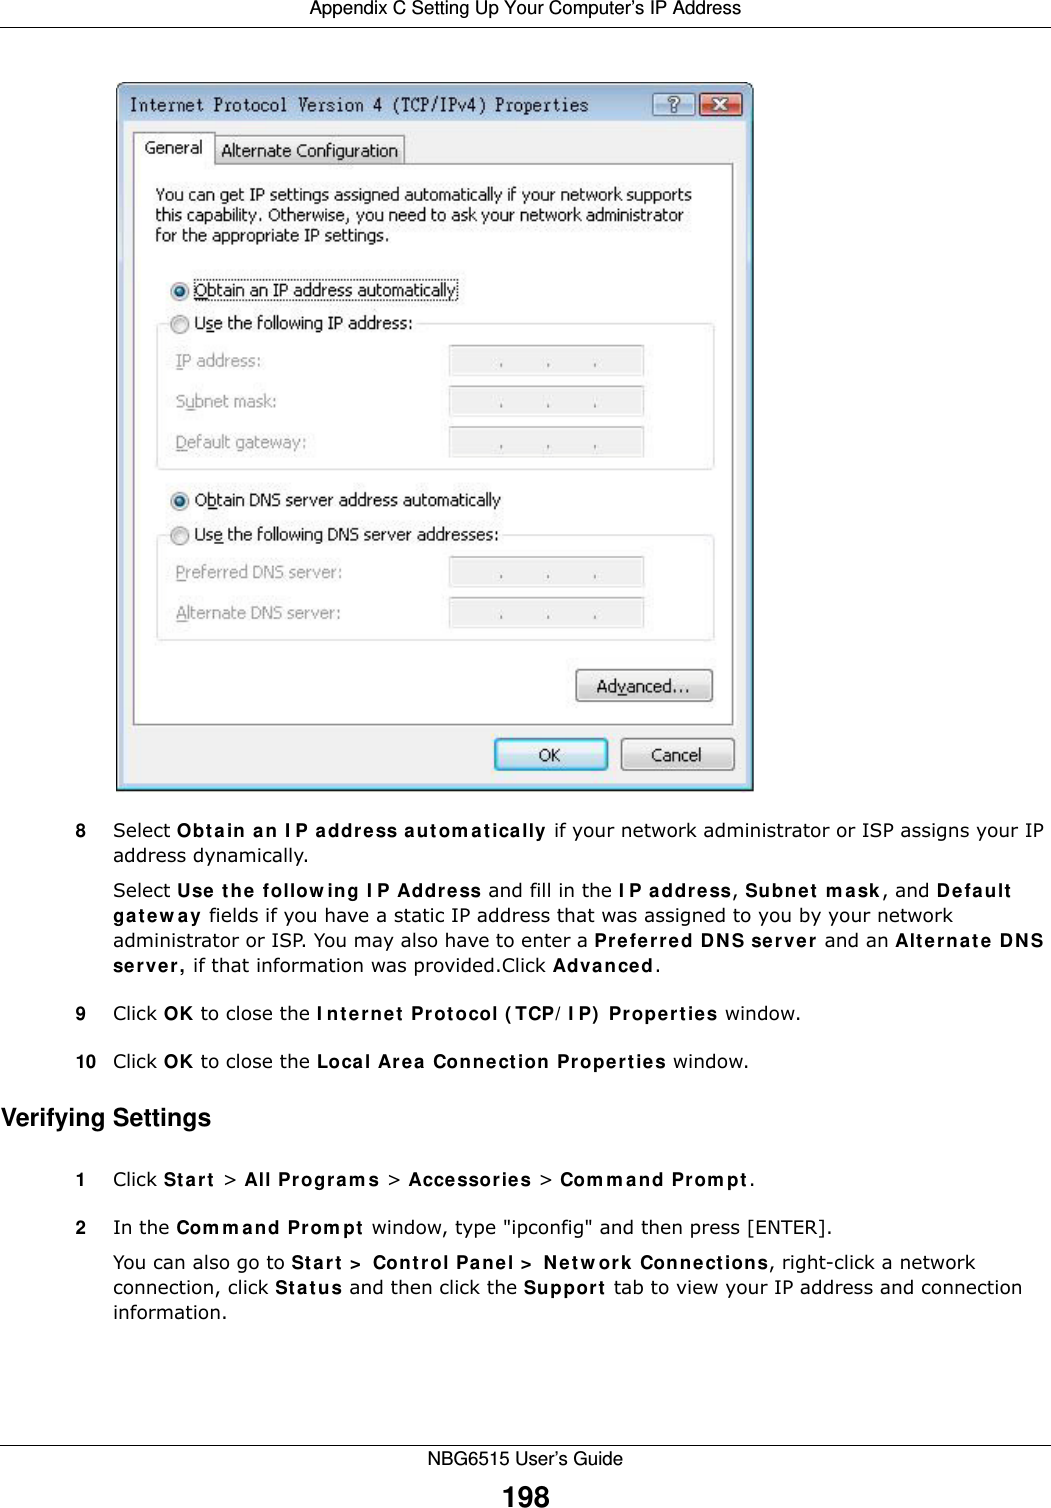 Appendix C Setting Up Your Computer’s IP AddressNBG6515 User’s Guide1988Select Obt ain  a n I P addre ss aut om at ica lly if your network administrator or ISP assigns your IP address dynamically.Select Use  t h e  follow ing I P Addre ss and fill in the I P a ddre ss, Subne t  m ask, and D e fau lt  ga t e w a y fields if you have a static IP address that was assigned to you by your network administrator or ISP. You may also have to enter a Pre fe r r e d D N S se rve r  and an Alt e rn a t e  DN S ser ver , if that information was provided.Click Adva nce d .9Click OK to close the I nt erne t  Prot ocol ( TCP/ I P)  Proper t ie s window.10 Click OK to close the Loca l Area  Conn ect ion Pr oper t ies window.Verifying Settings1Click St a rt  &gt; All Pr ogra m s &gt; Acce ssor ies &gt; Com m a nd Pr om pt .2In the Com m a nd Pr om pt  window, type &quot;ipconfig&quot; and then press [ENTER]. You can also go to St ar t  &gt;  Cont r ol Pa n el &gt;  N e t w ork  Conne ct ions, right-click a network connection, click St a t u s and then click the Suppor t  tab to view your IP address and connection information.